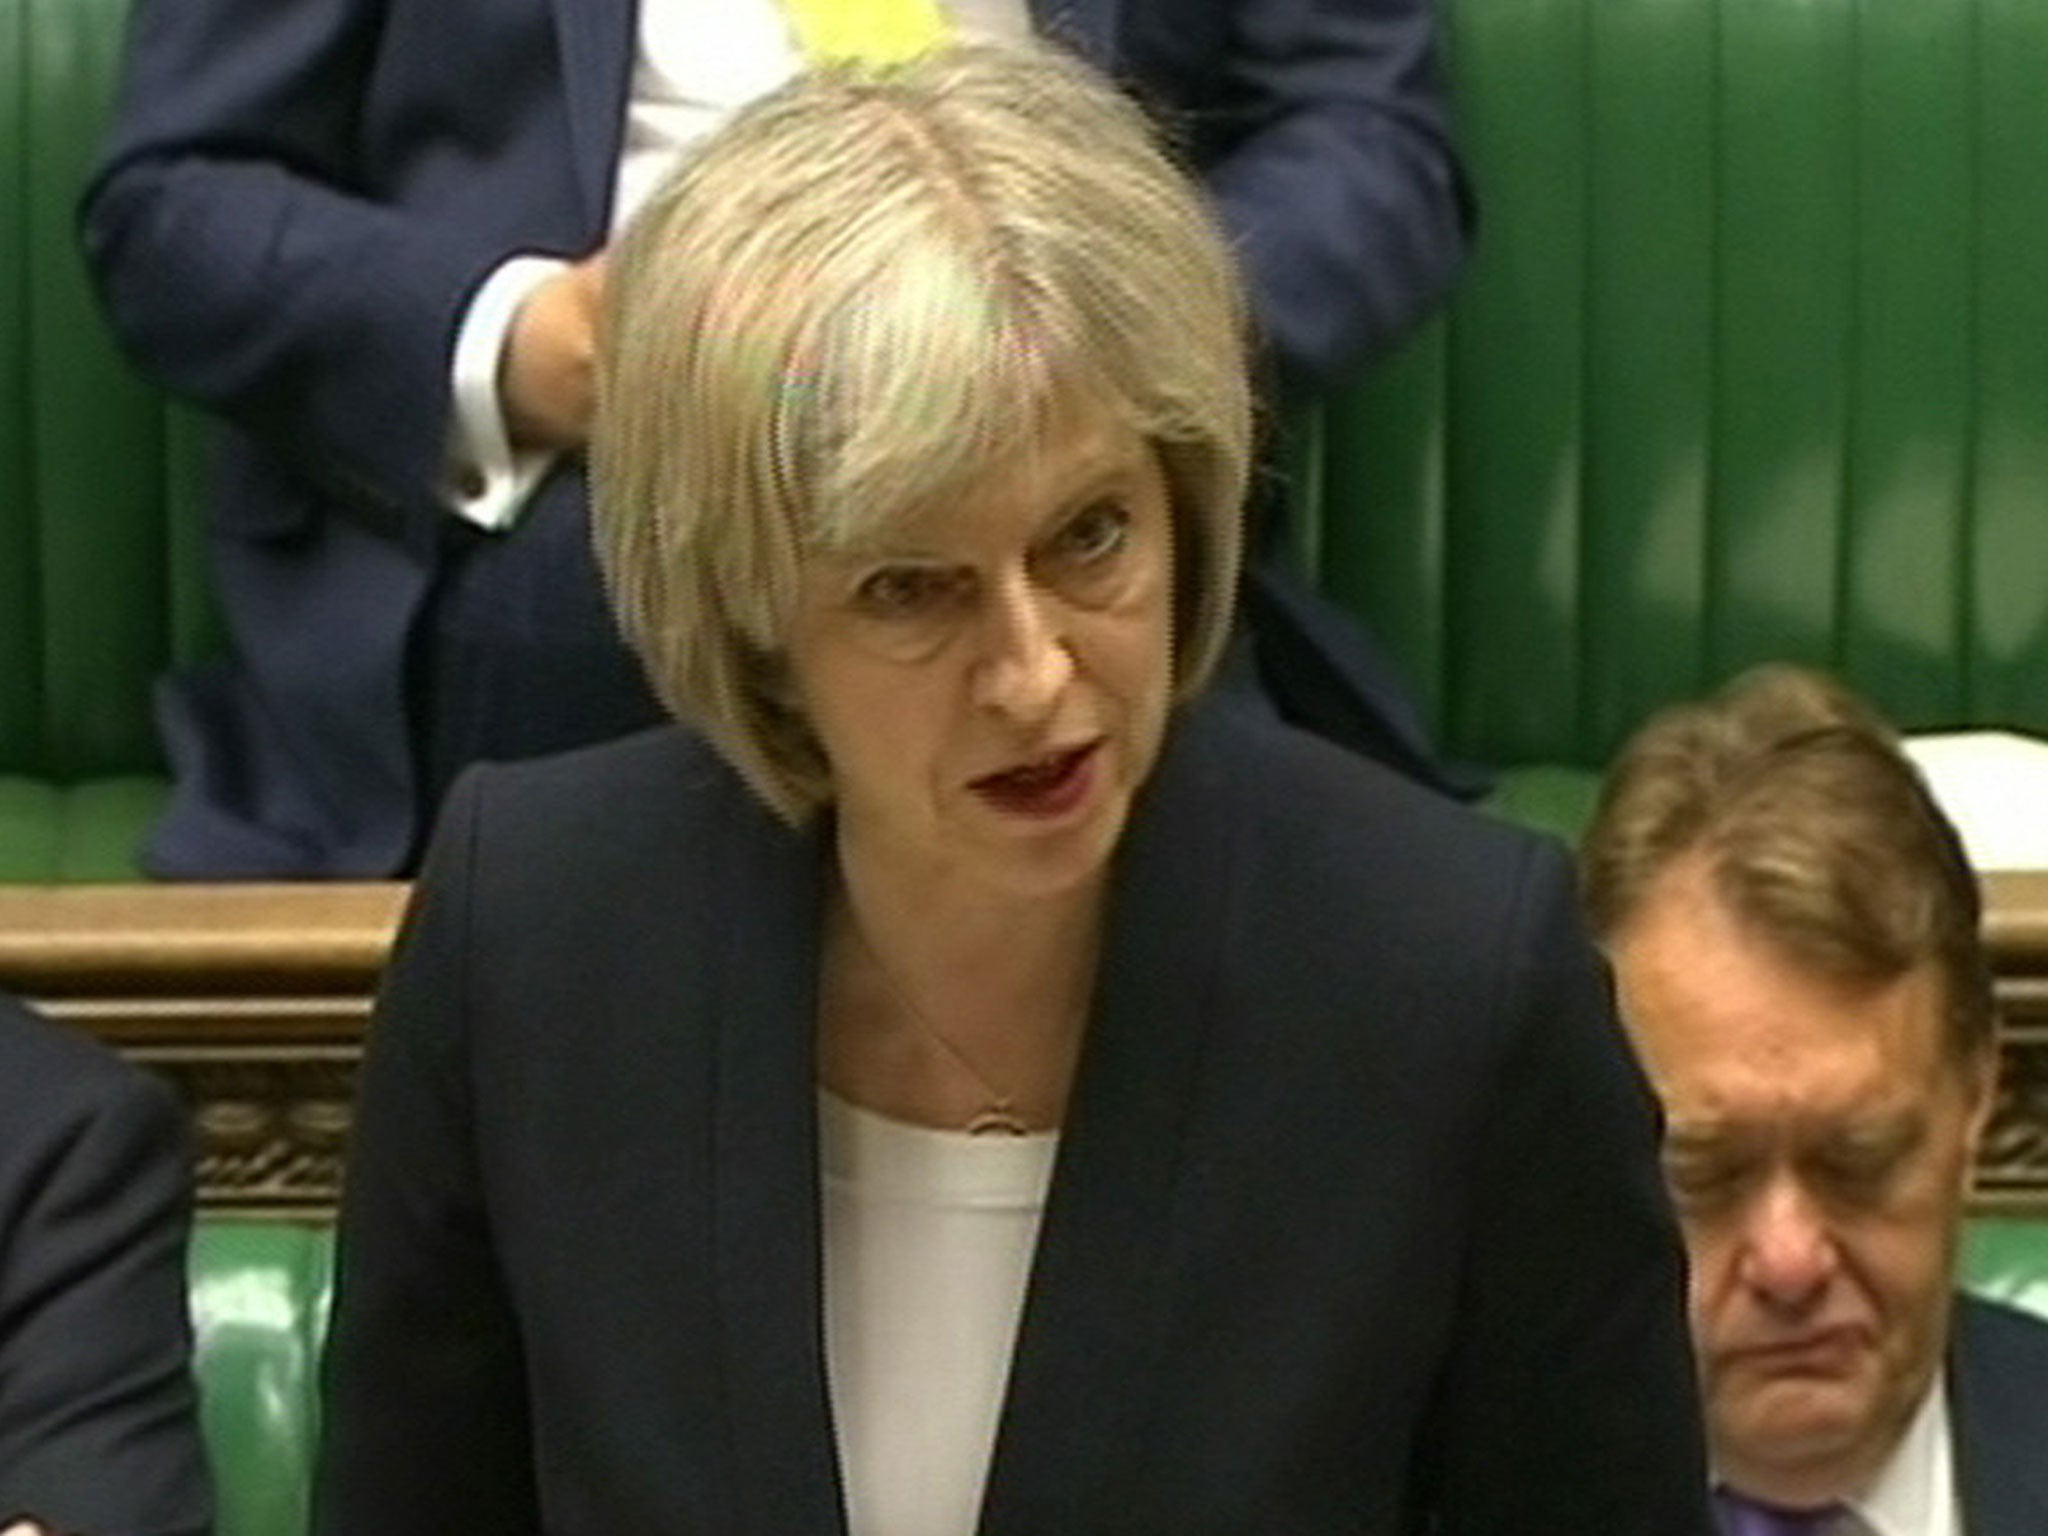 Theresa May speaking in the Commons